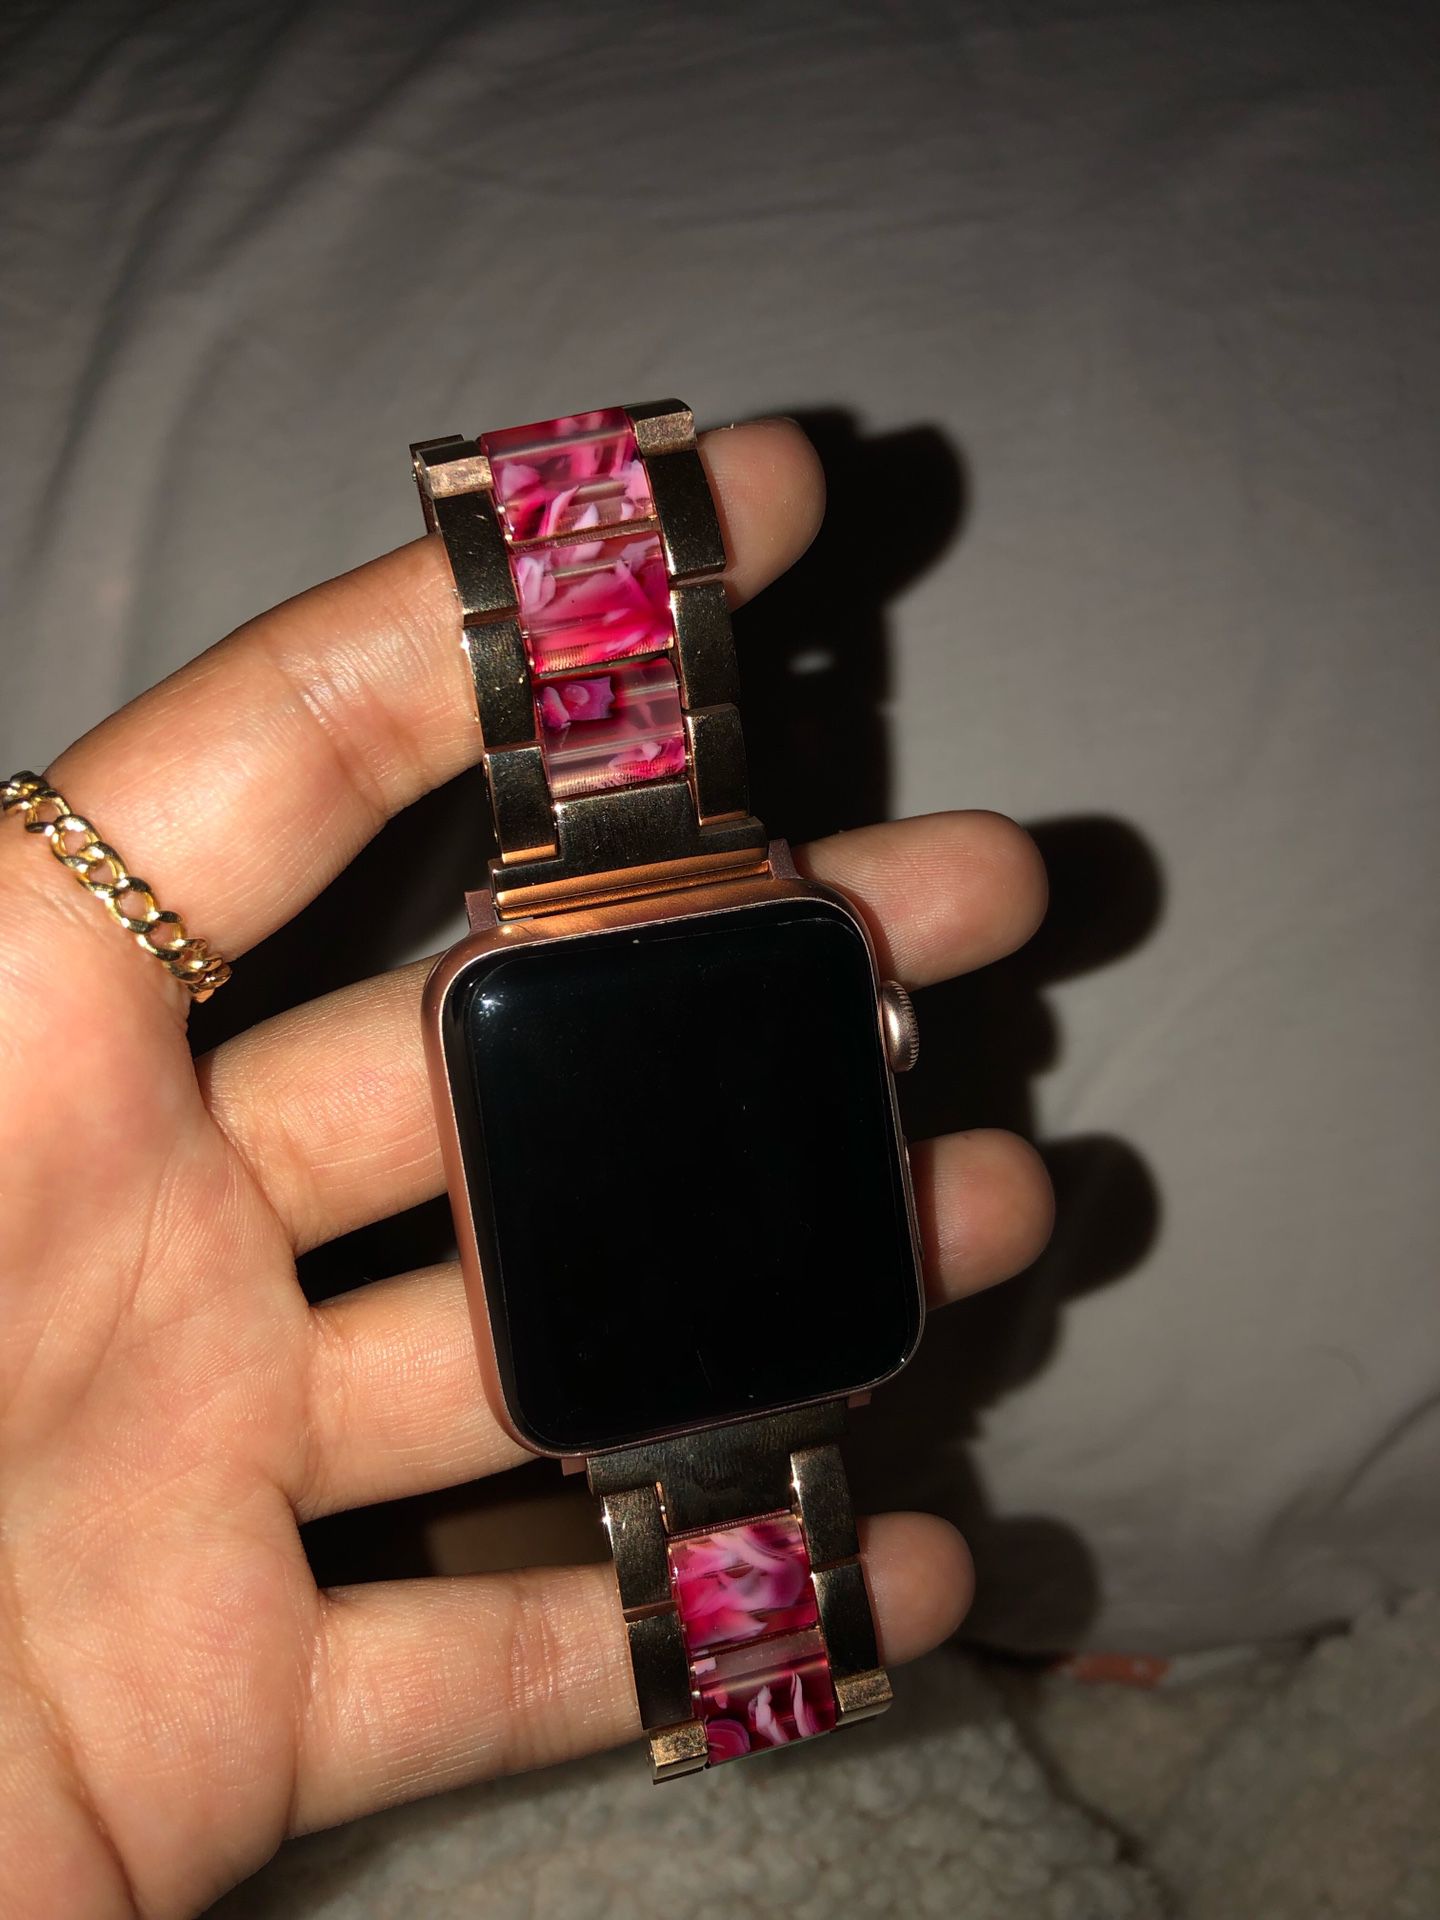 Series 3 (GPS Cellular) Apple Watch Rose Gold 42’mm (comes with 2 bands)